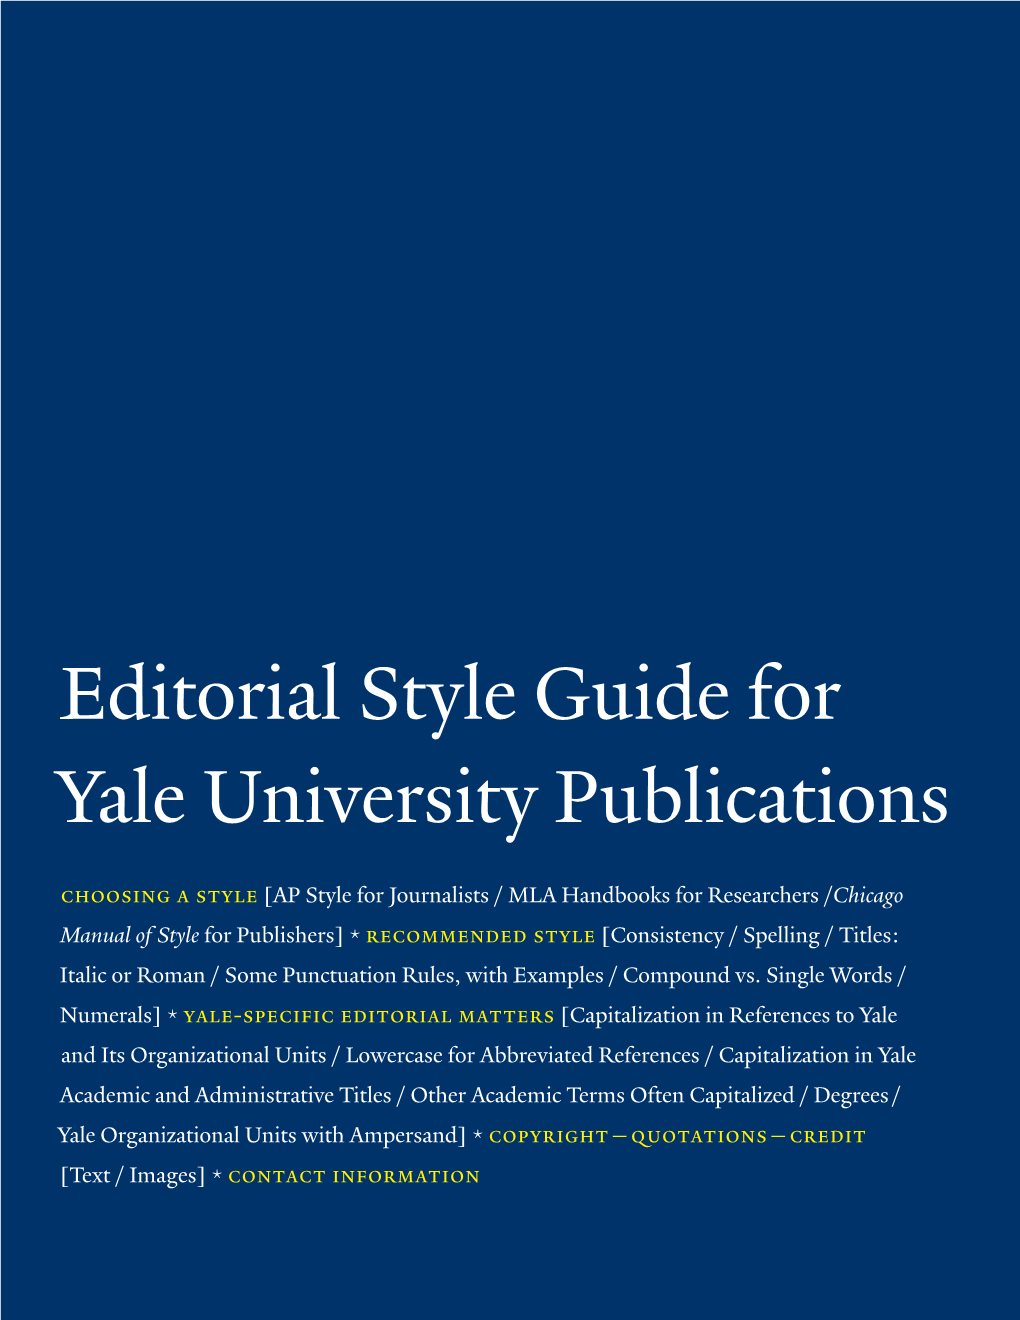 Editorial Style Guide for Yale University Publications